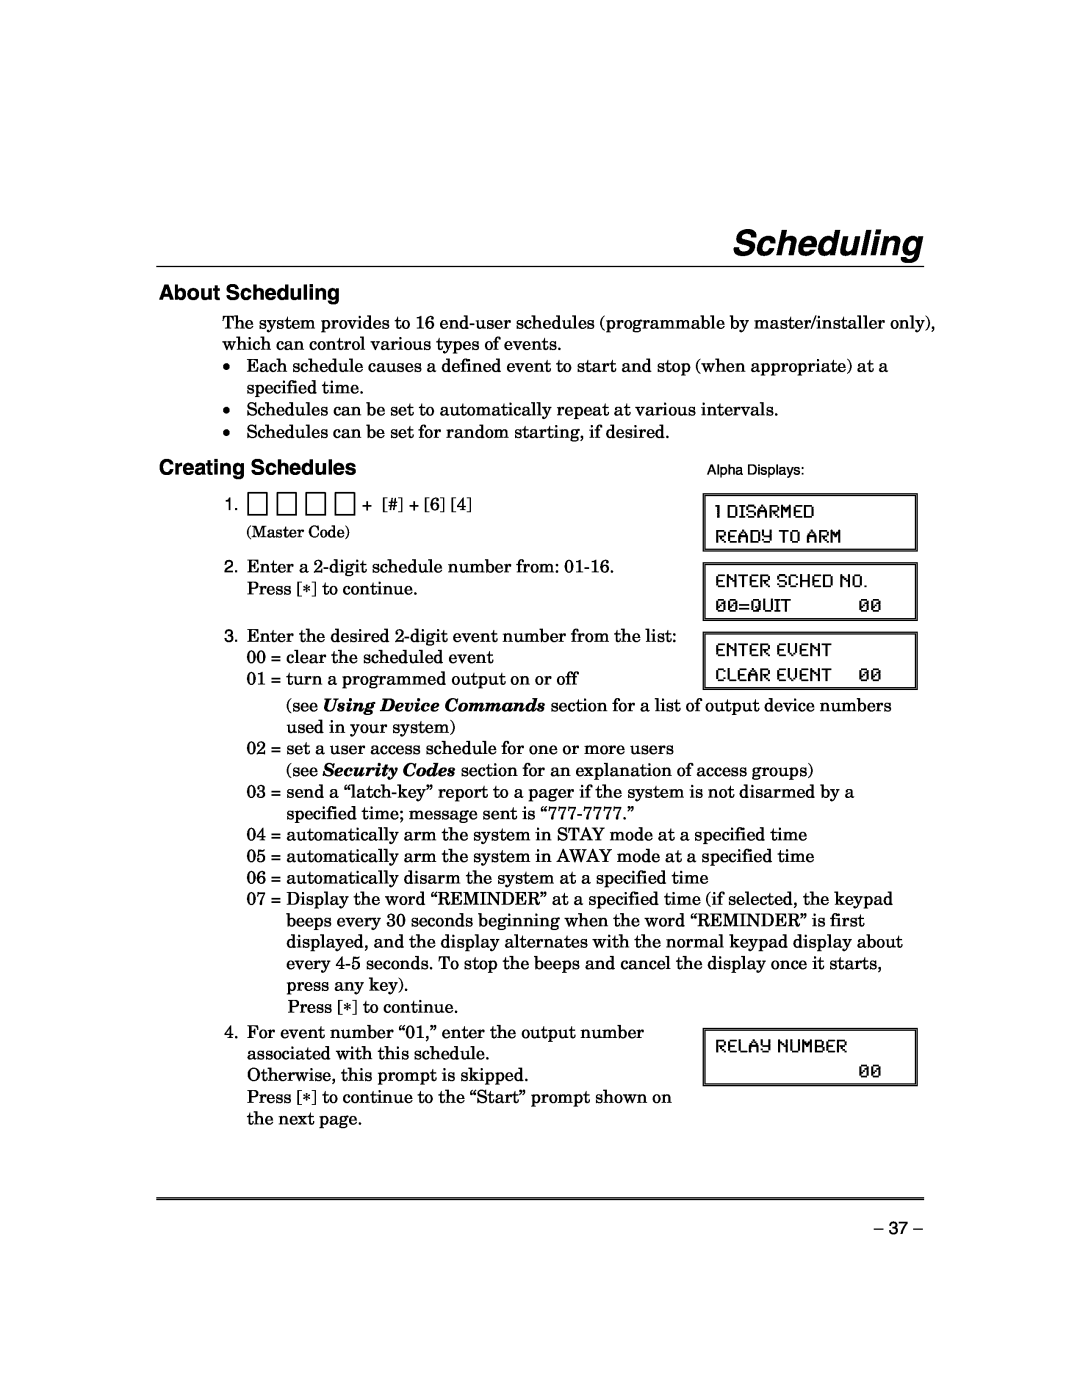 Honeywell VISTA-21IP manual About Scheduling, Creating Schedules, Disarmed, 00=QUIT, Relay Number, Enter Sched No 